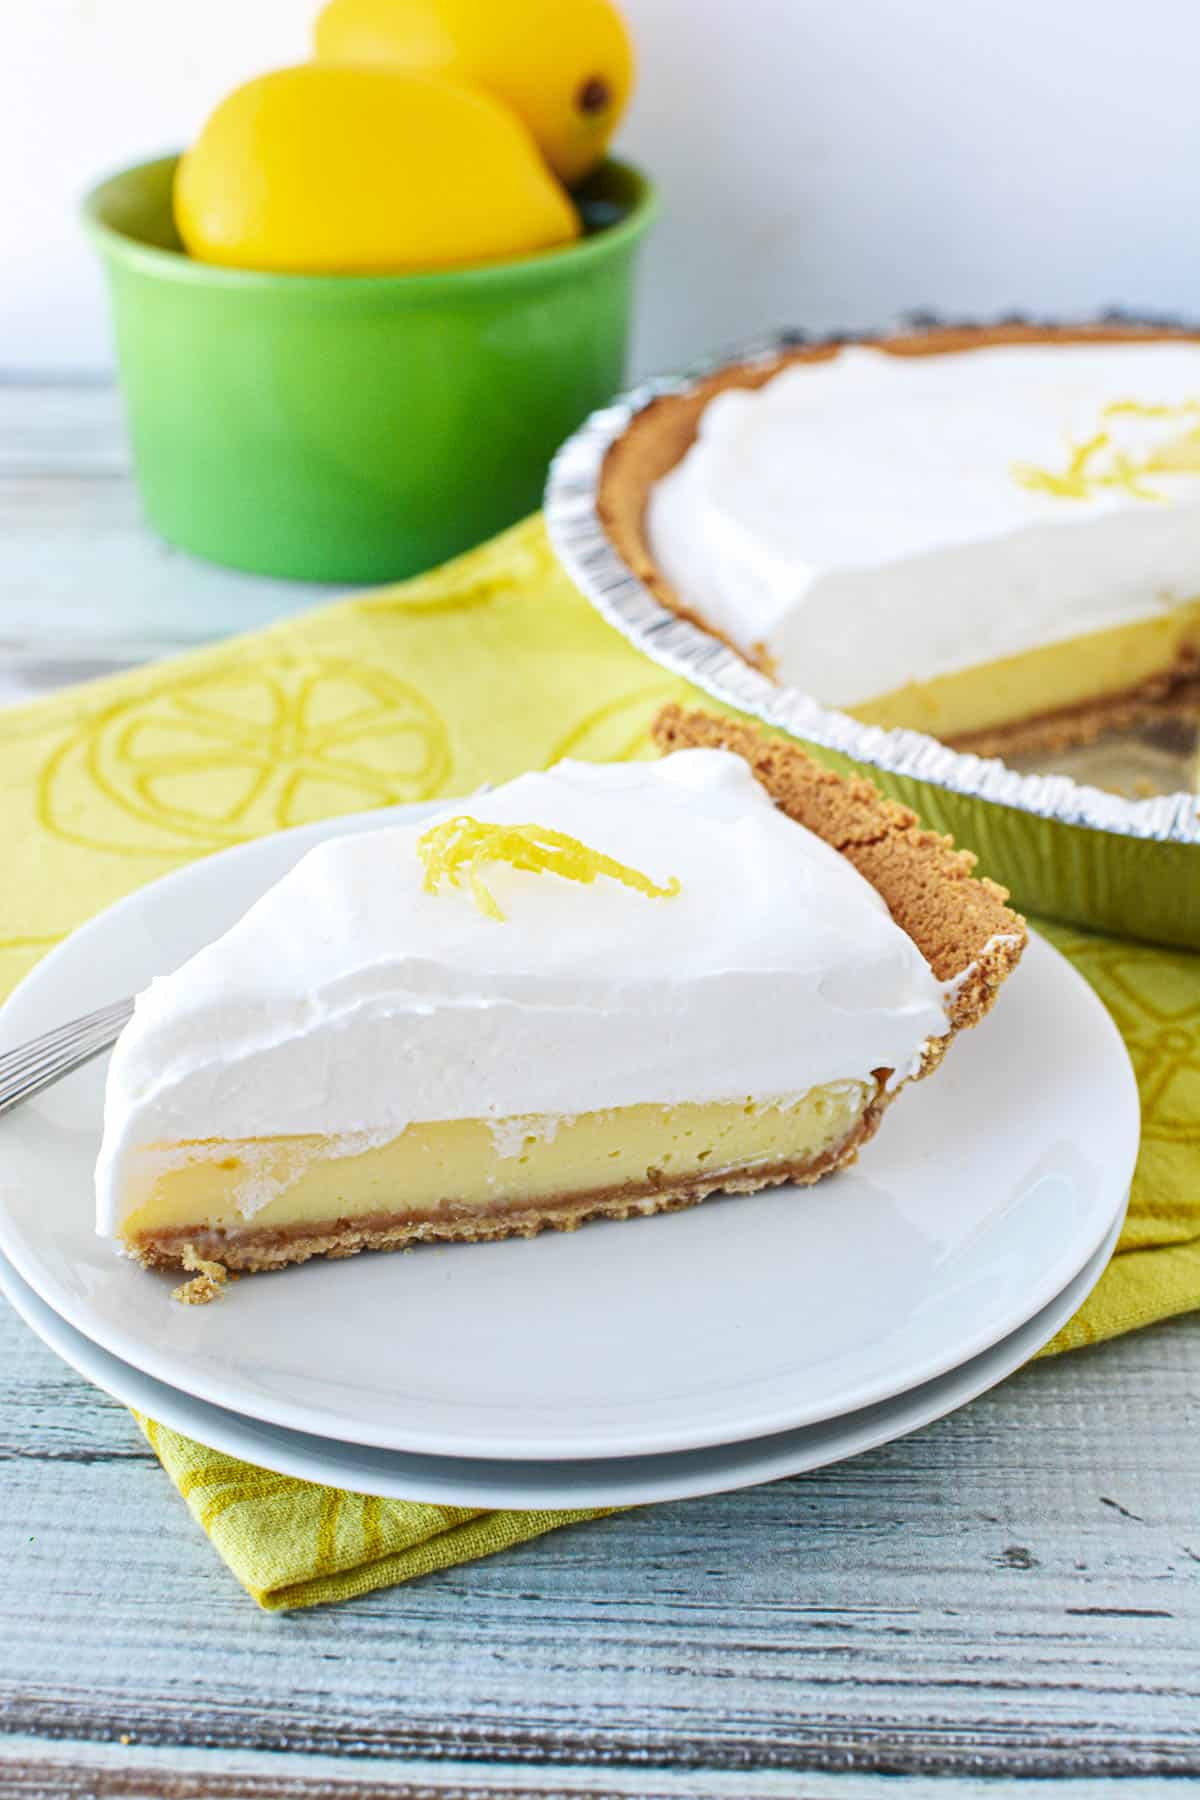 A slice of Lemon Pie with Condensed Milk on a plate